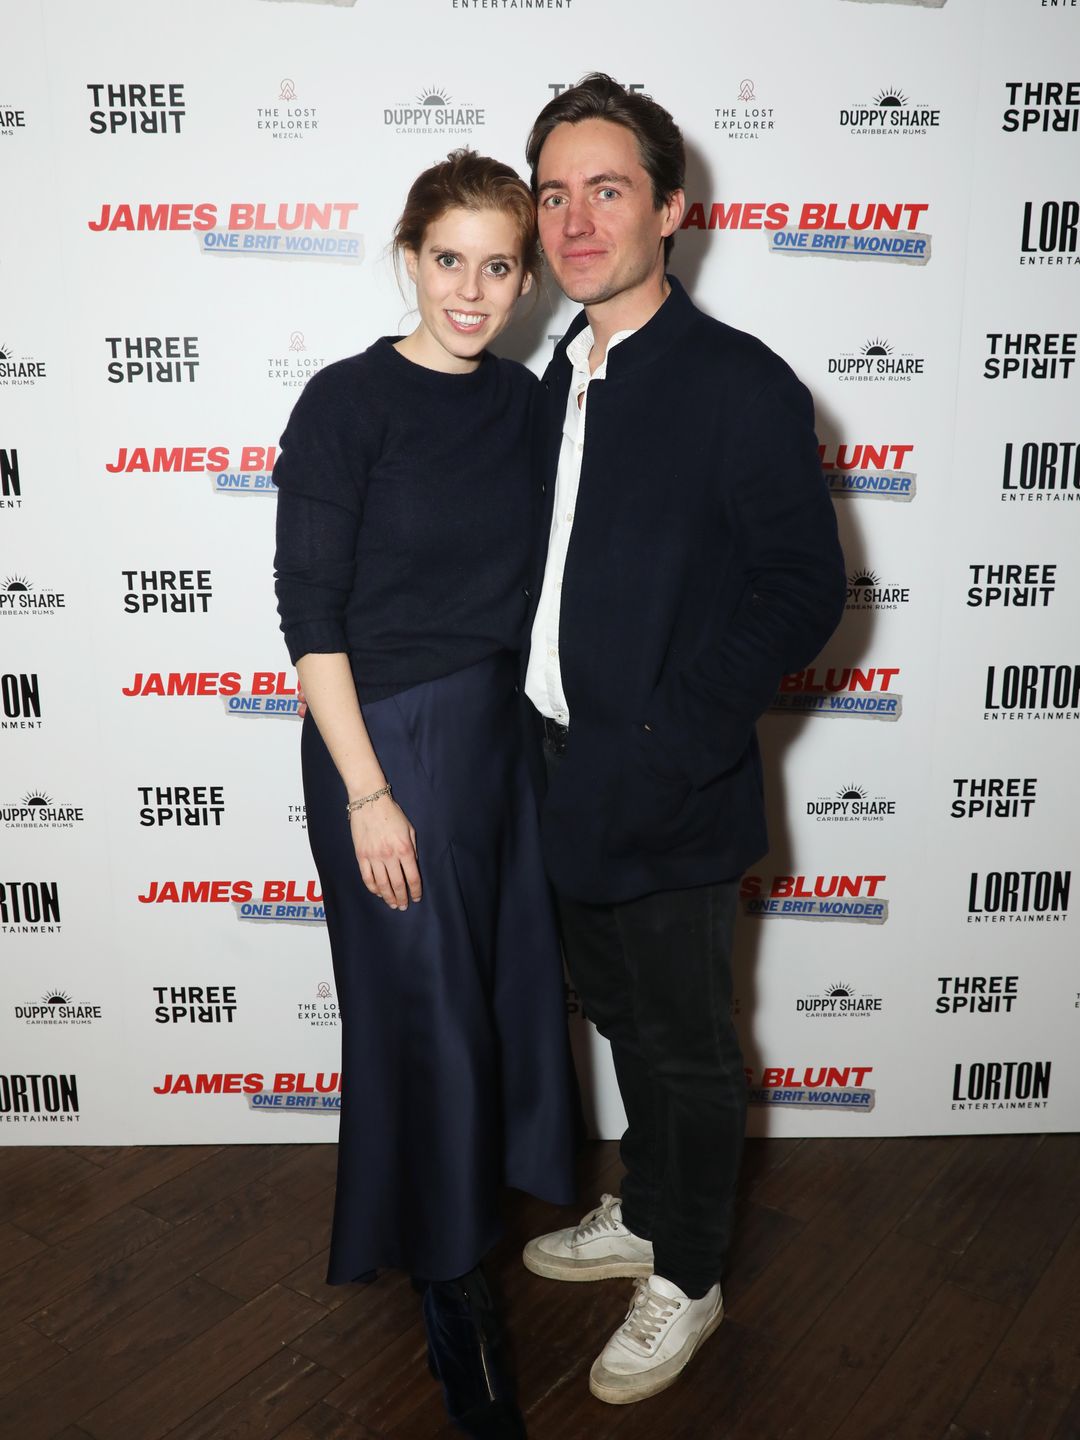 Princess Beatrice of York and her Edoardo Mapelli Mozzi are couple goals in matching navy hues